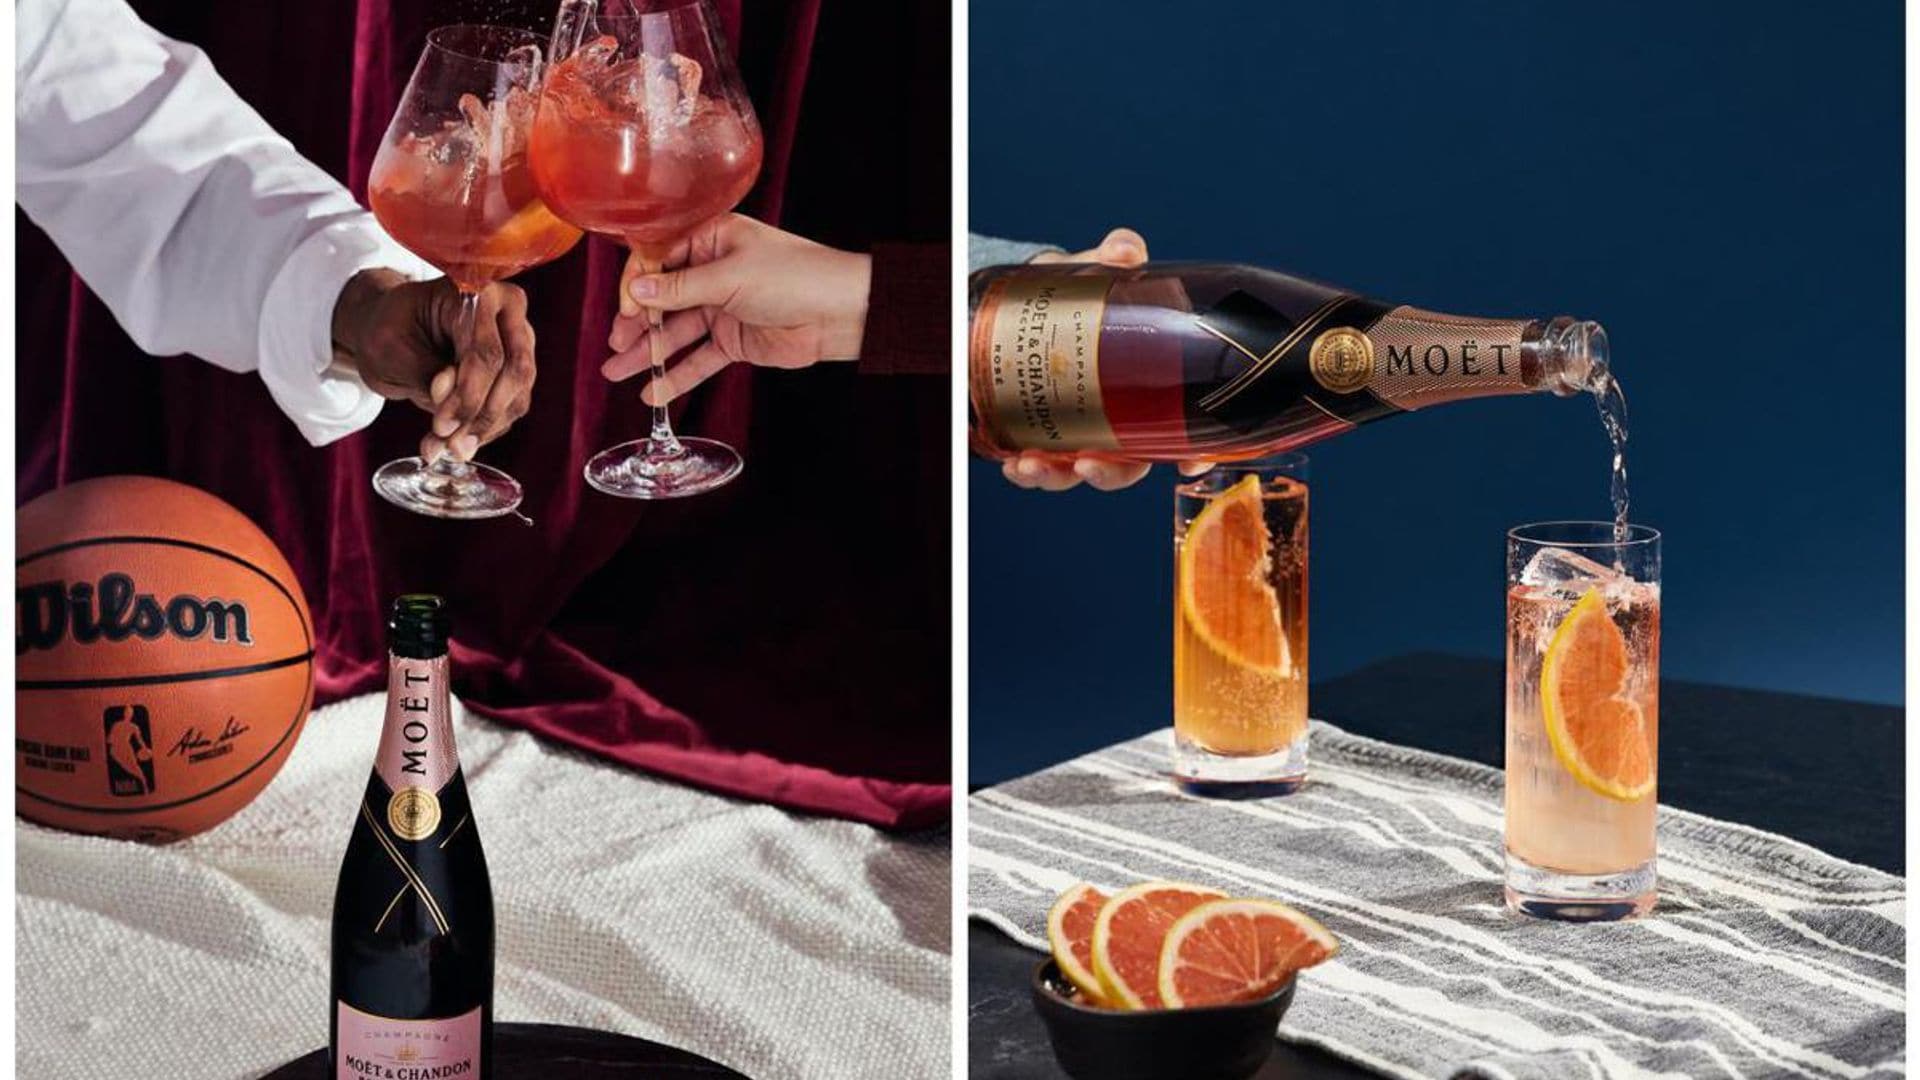 Celebrate your favorite NBA team with a little bubbly from Moët & Chandon